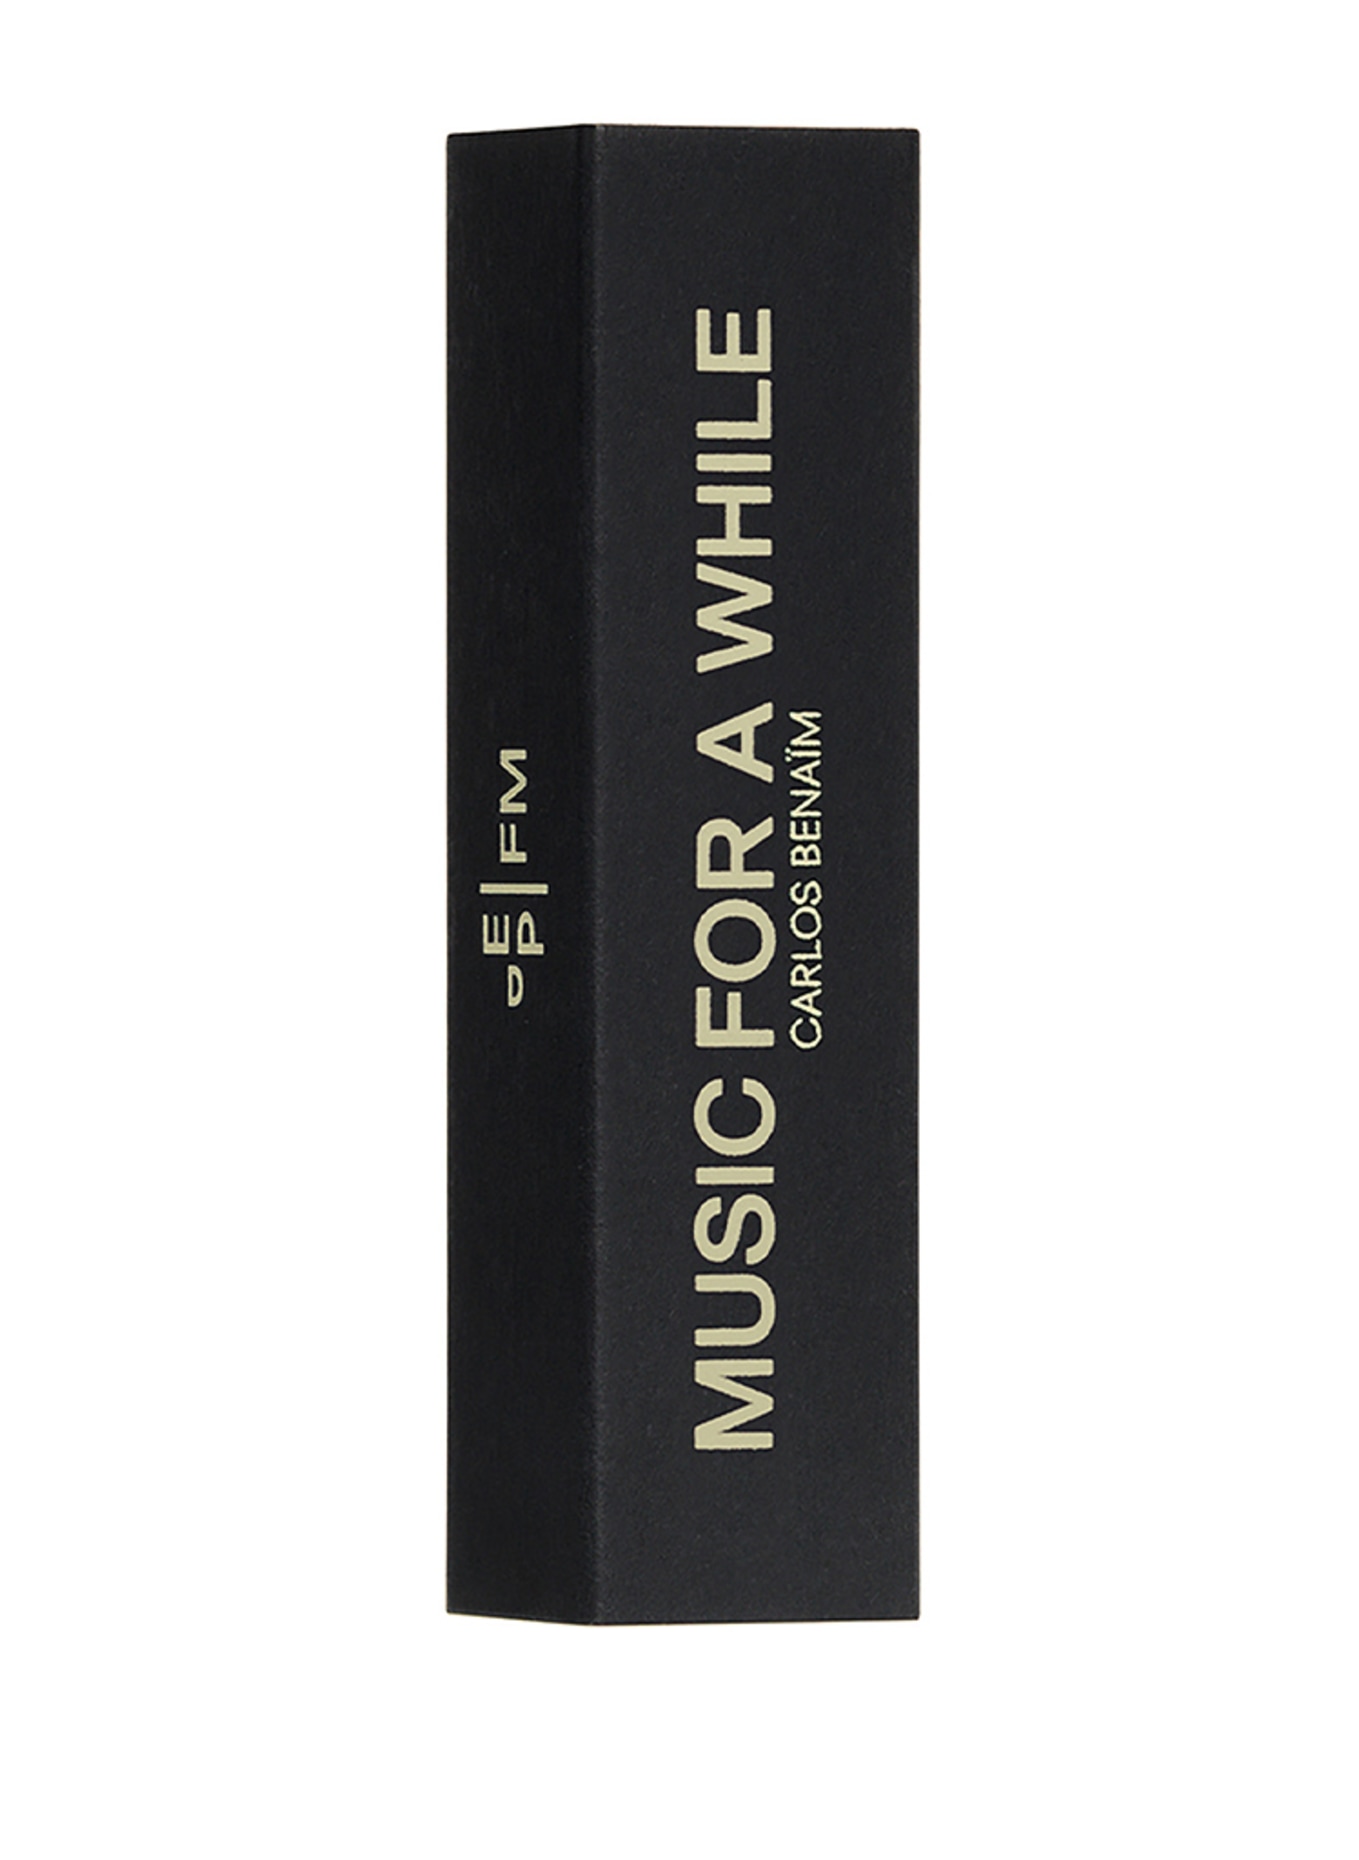 EDITIONS DE PARFUMS FREDERIC MALLE MUSIC FOR A WHILE (Obrázek 2)